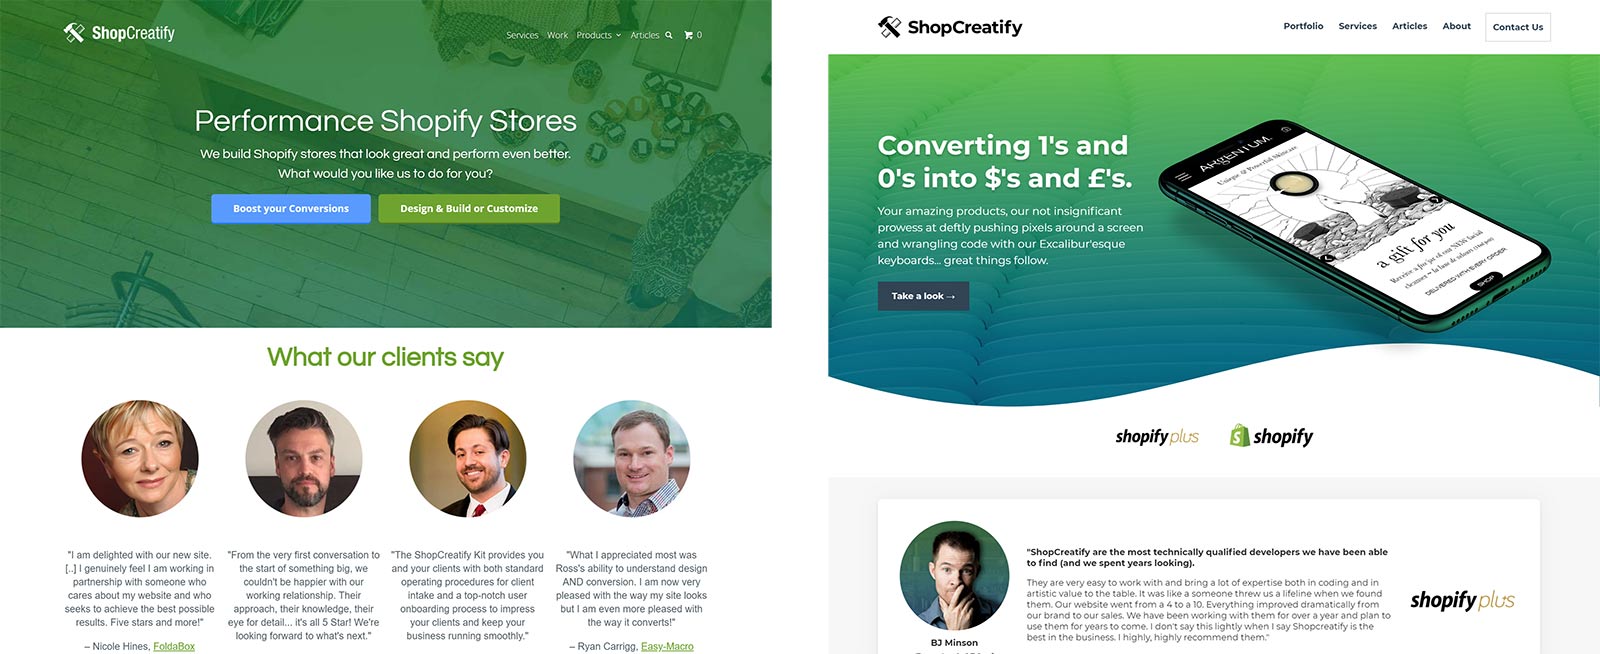 ShopCreatify Agency Site Redesign